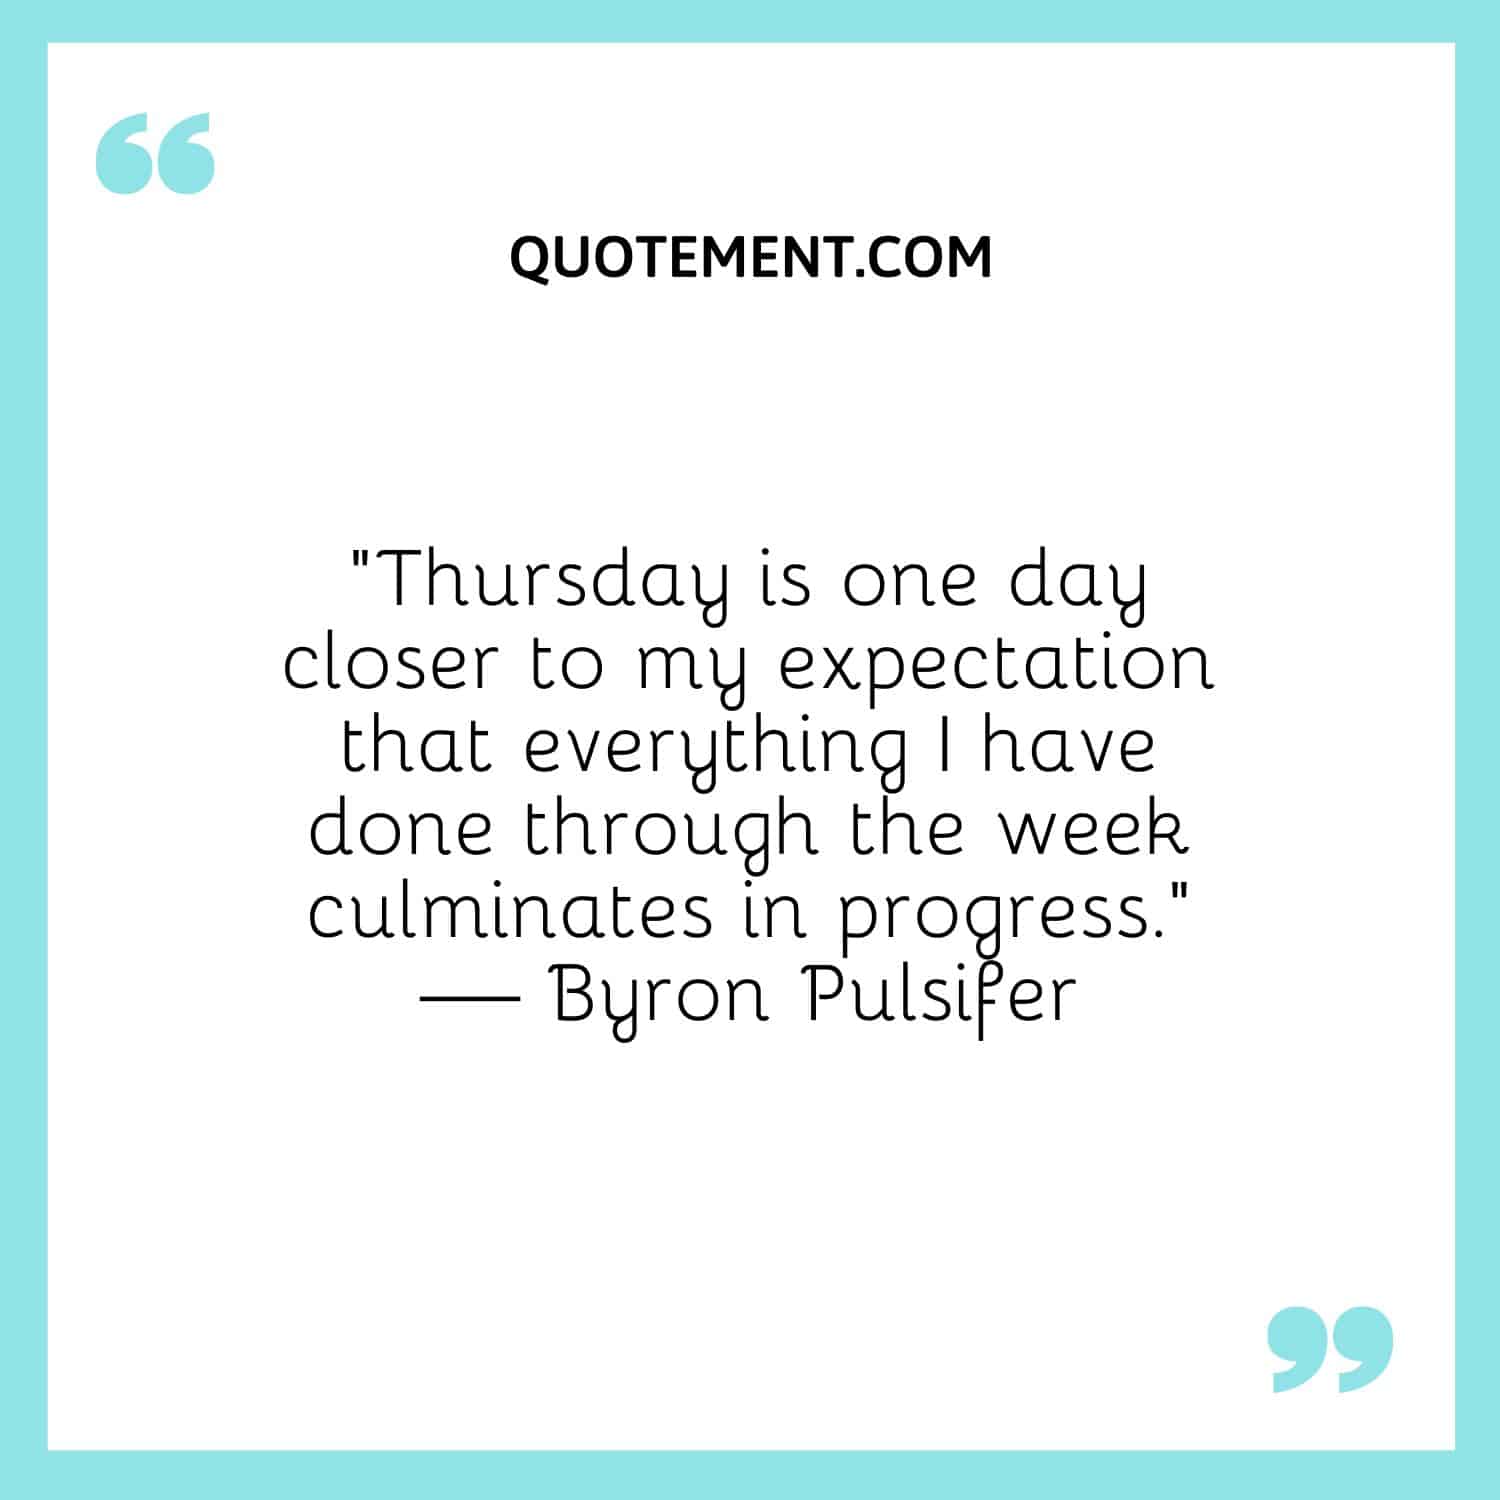 “Thursday is one day closer to my expectation that everything I have done through the week culminates in progress.” — Byron Pulsifer